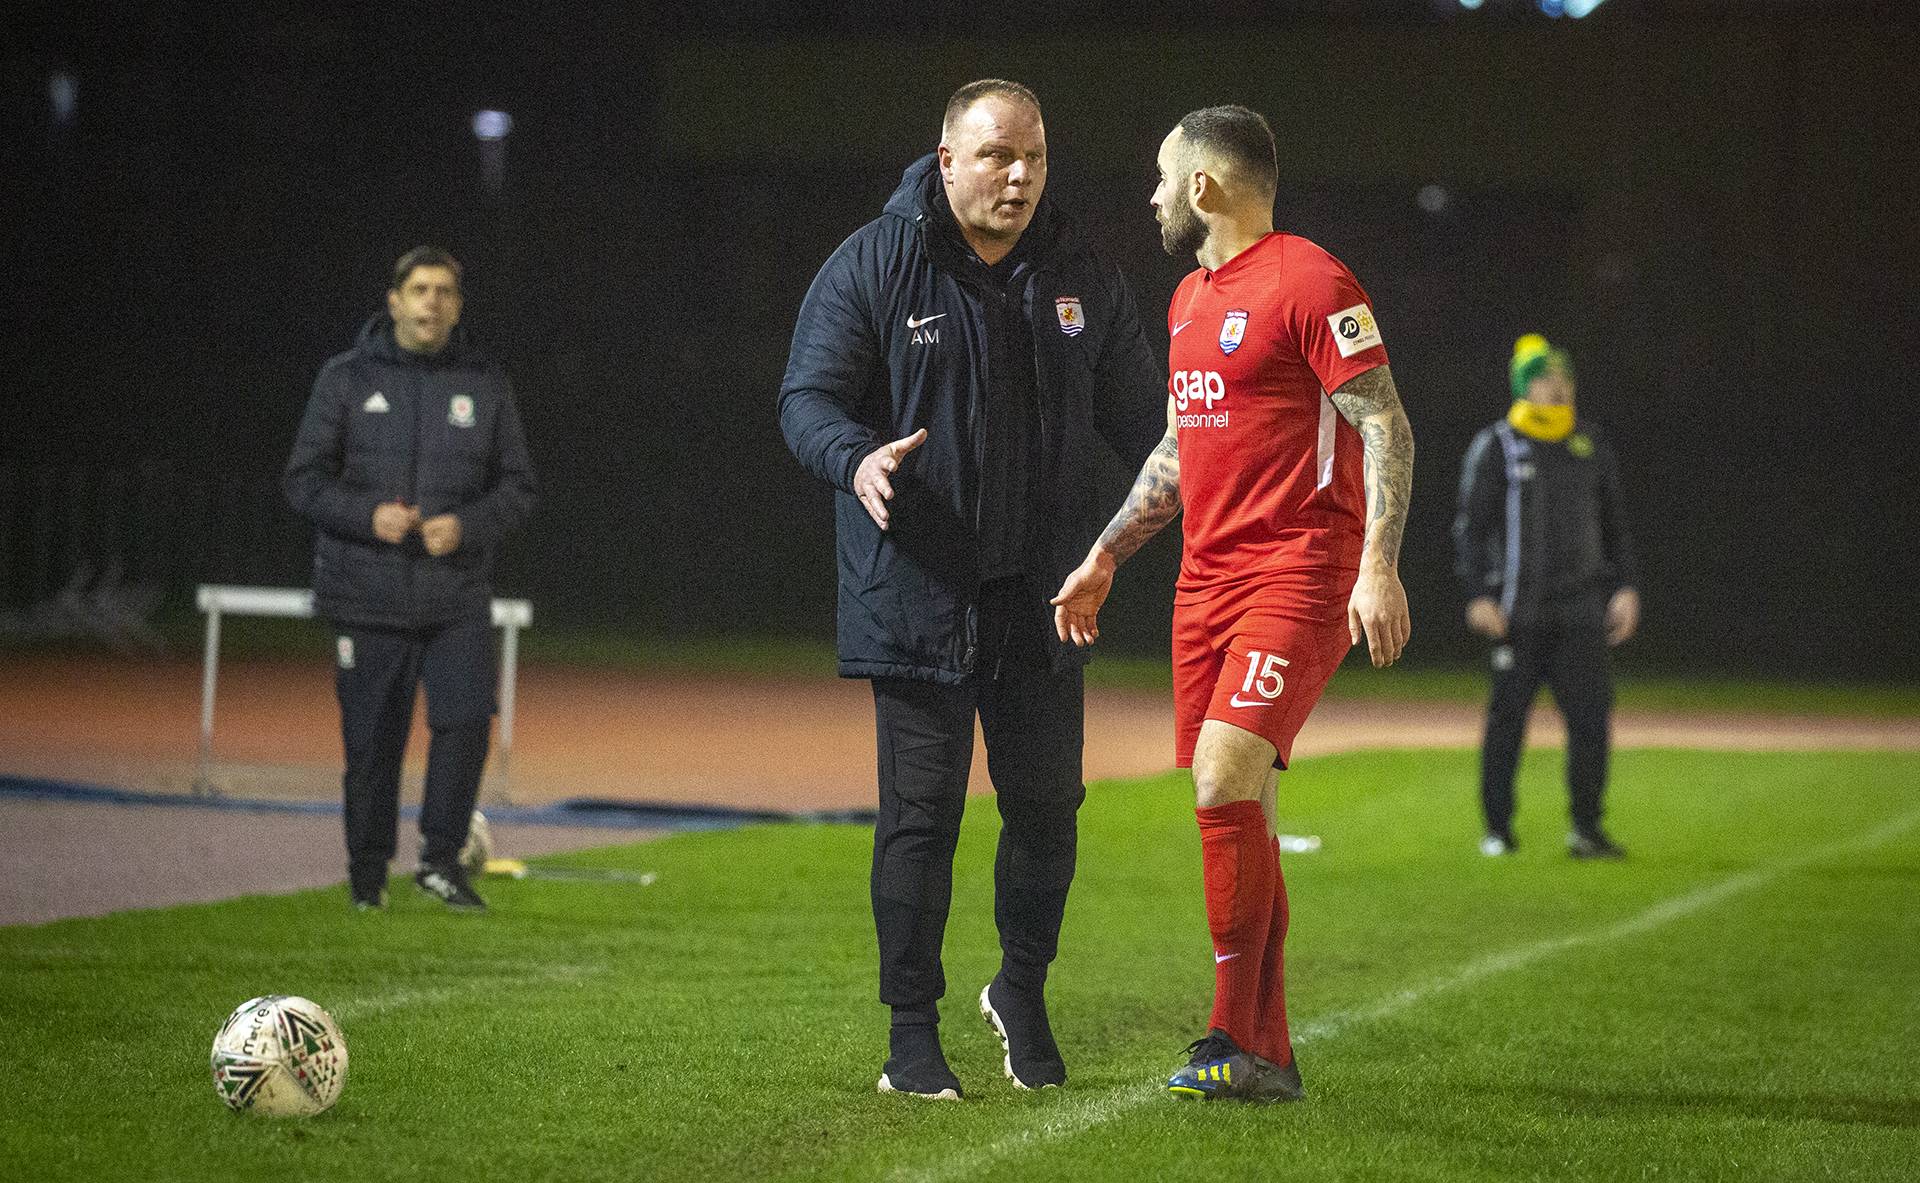 Andy Morrison and Danny Holmes talk during a match at Deeside Stadium | © NCM Media